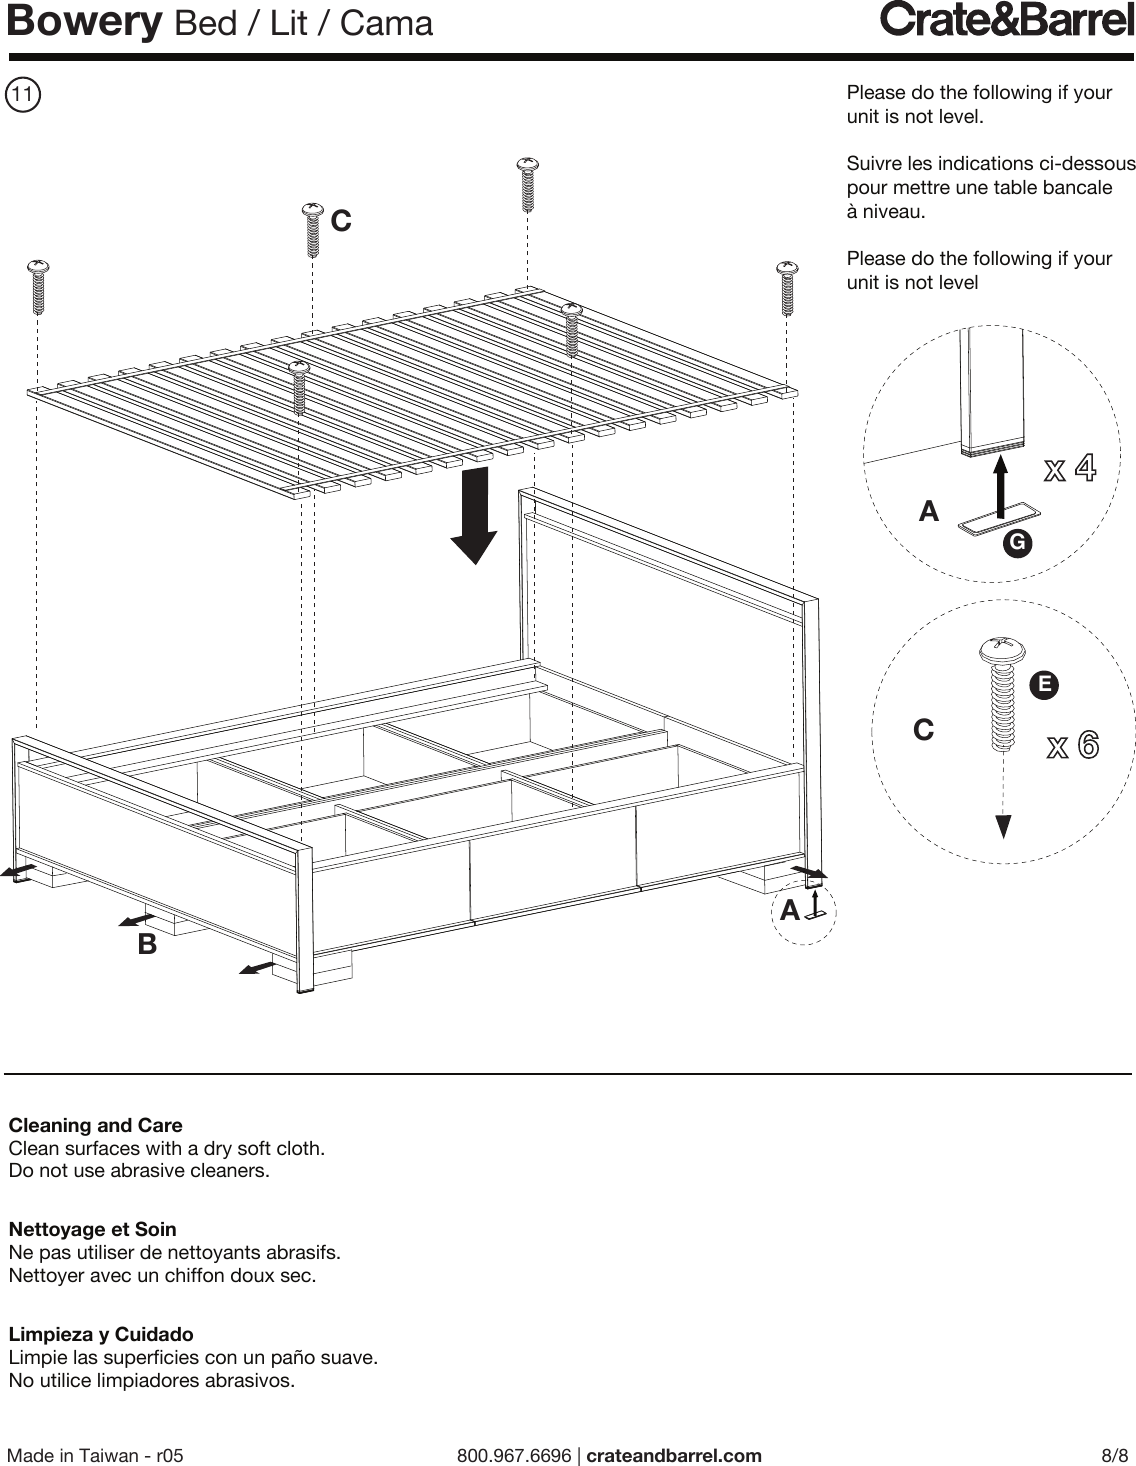 Page 8 of 8 - Crate-Barrel 304-Bowery-Bed-Ml Bowery Bed ML Assembly Instructions From Crate And Barrel